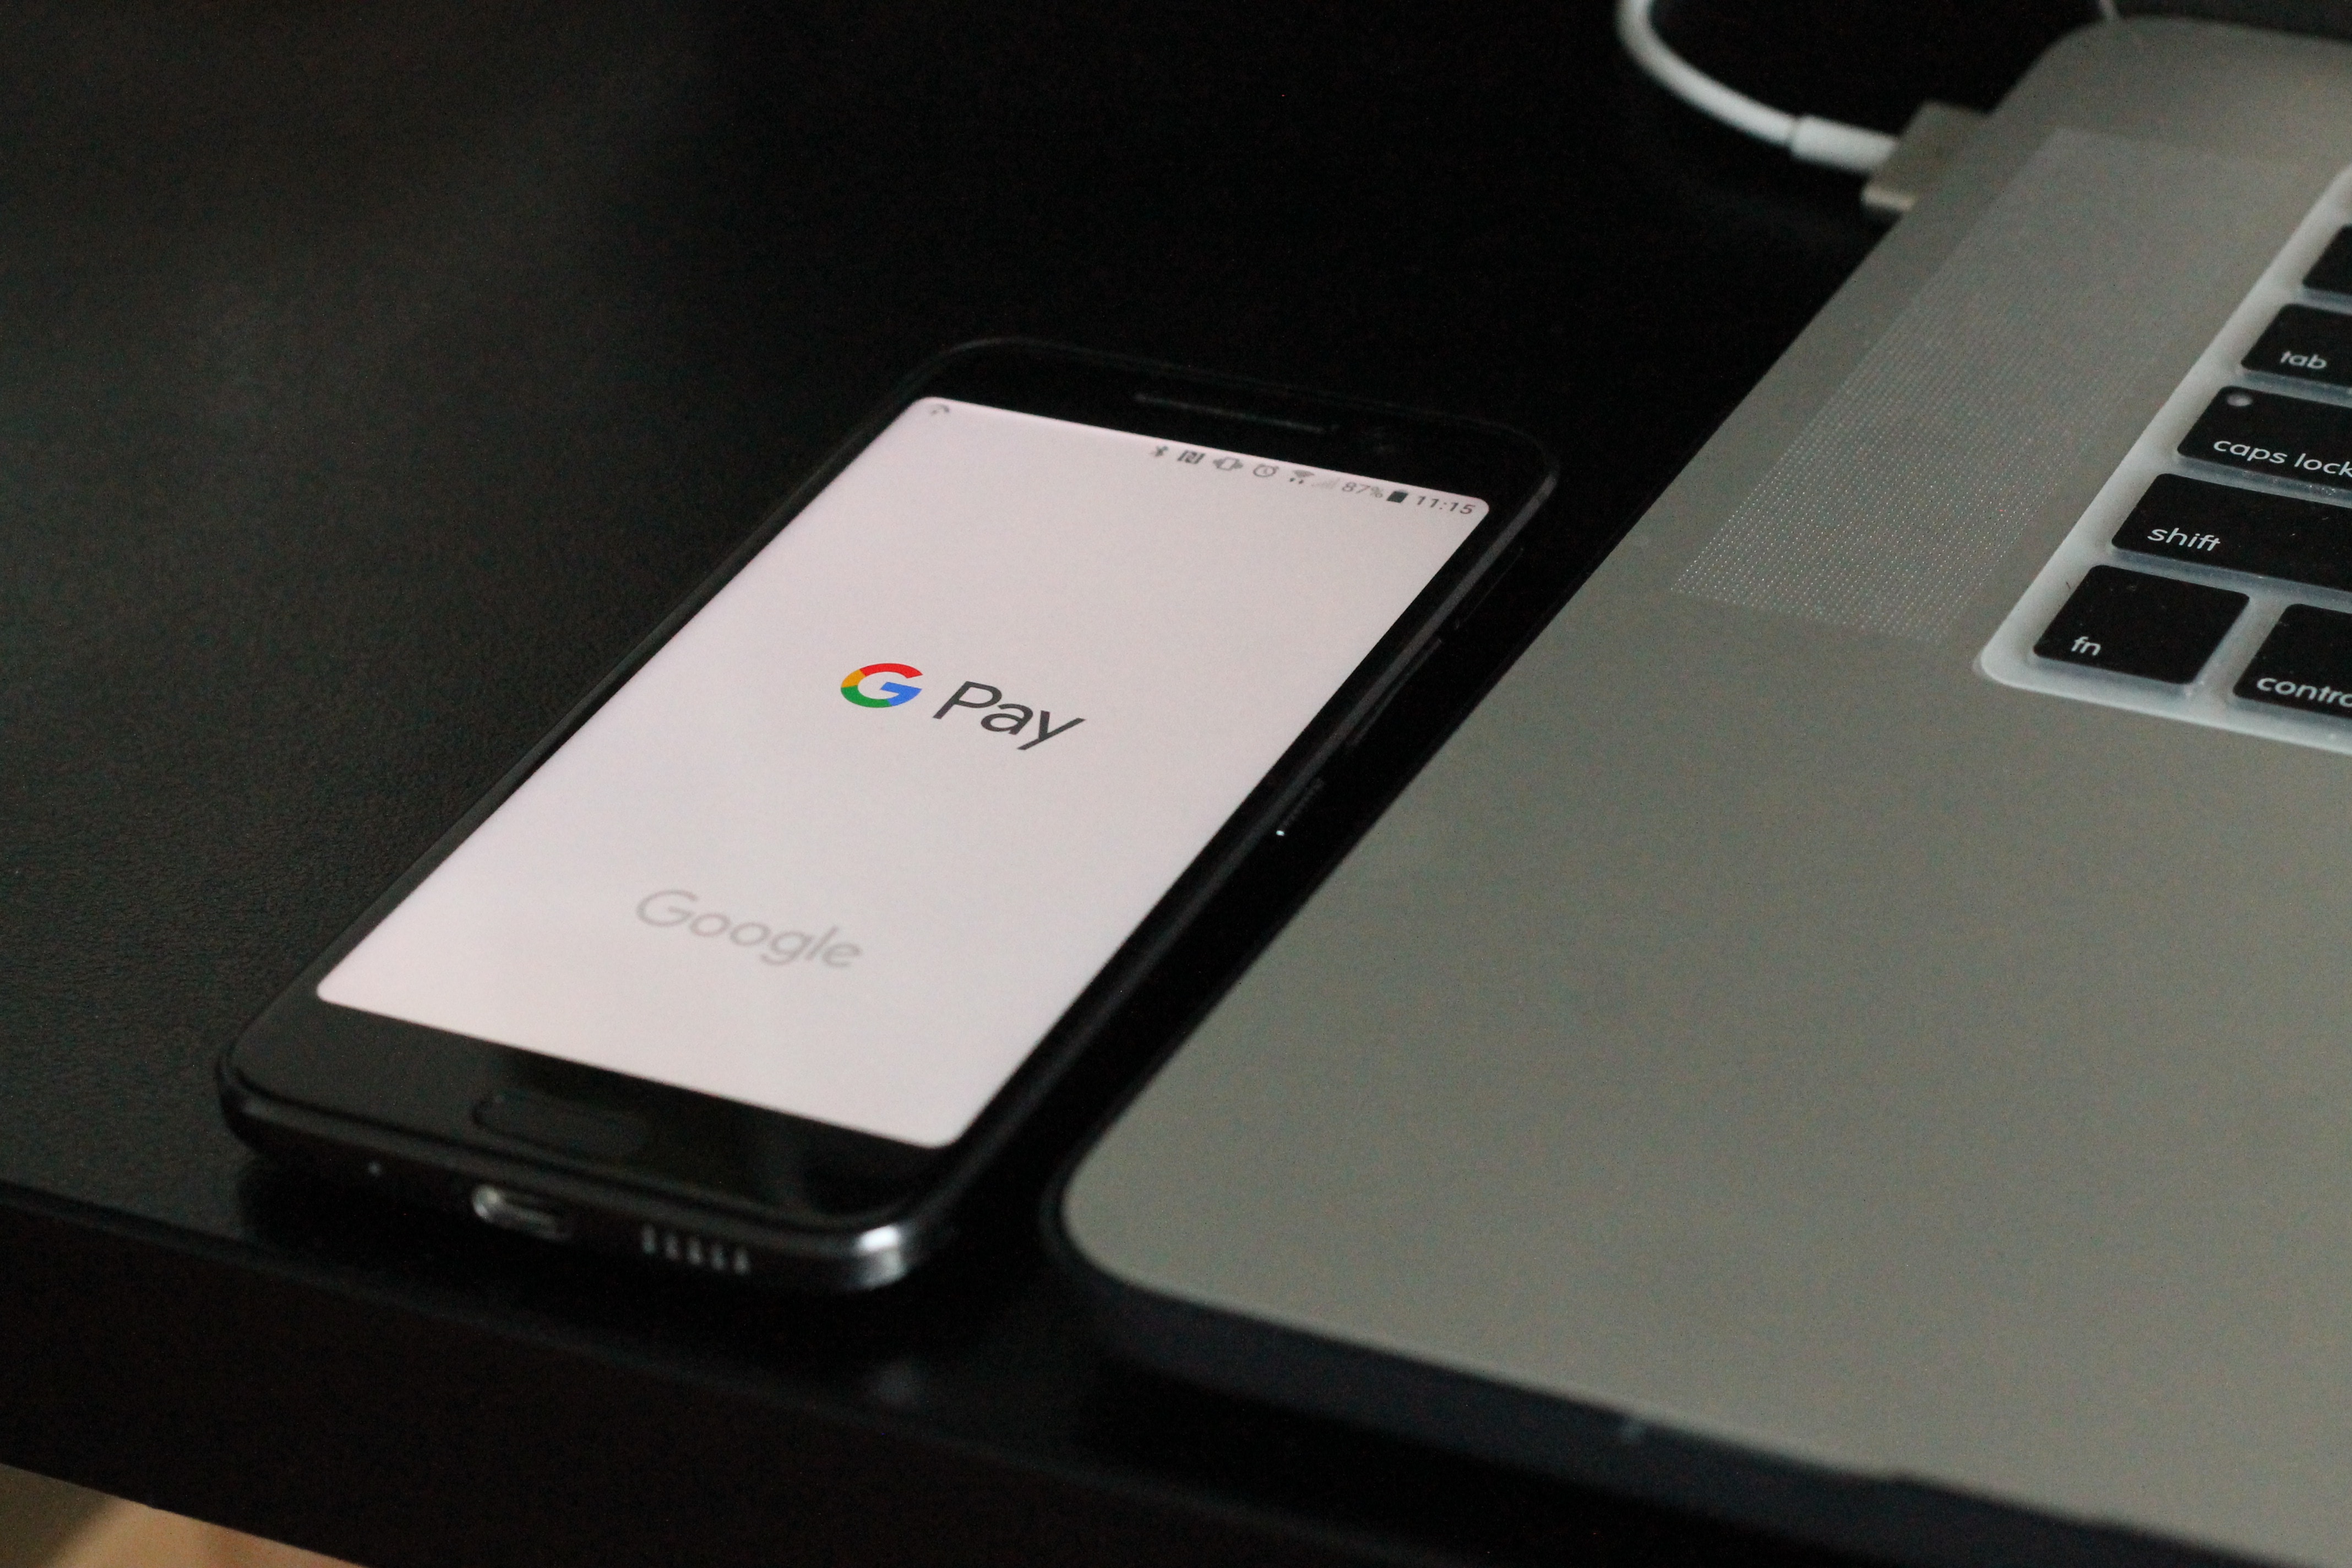 Google Pay sees FY19 profit soar 83% in India on strong digital payment adoption